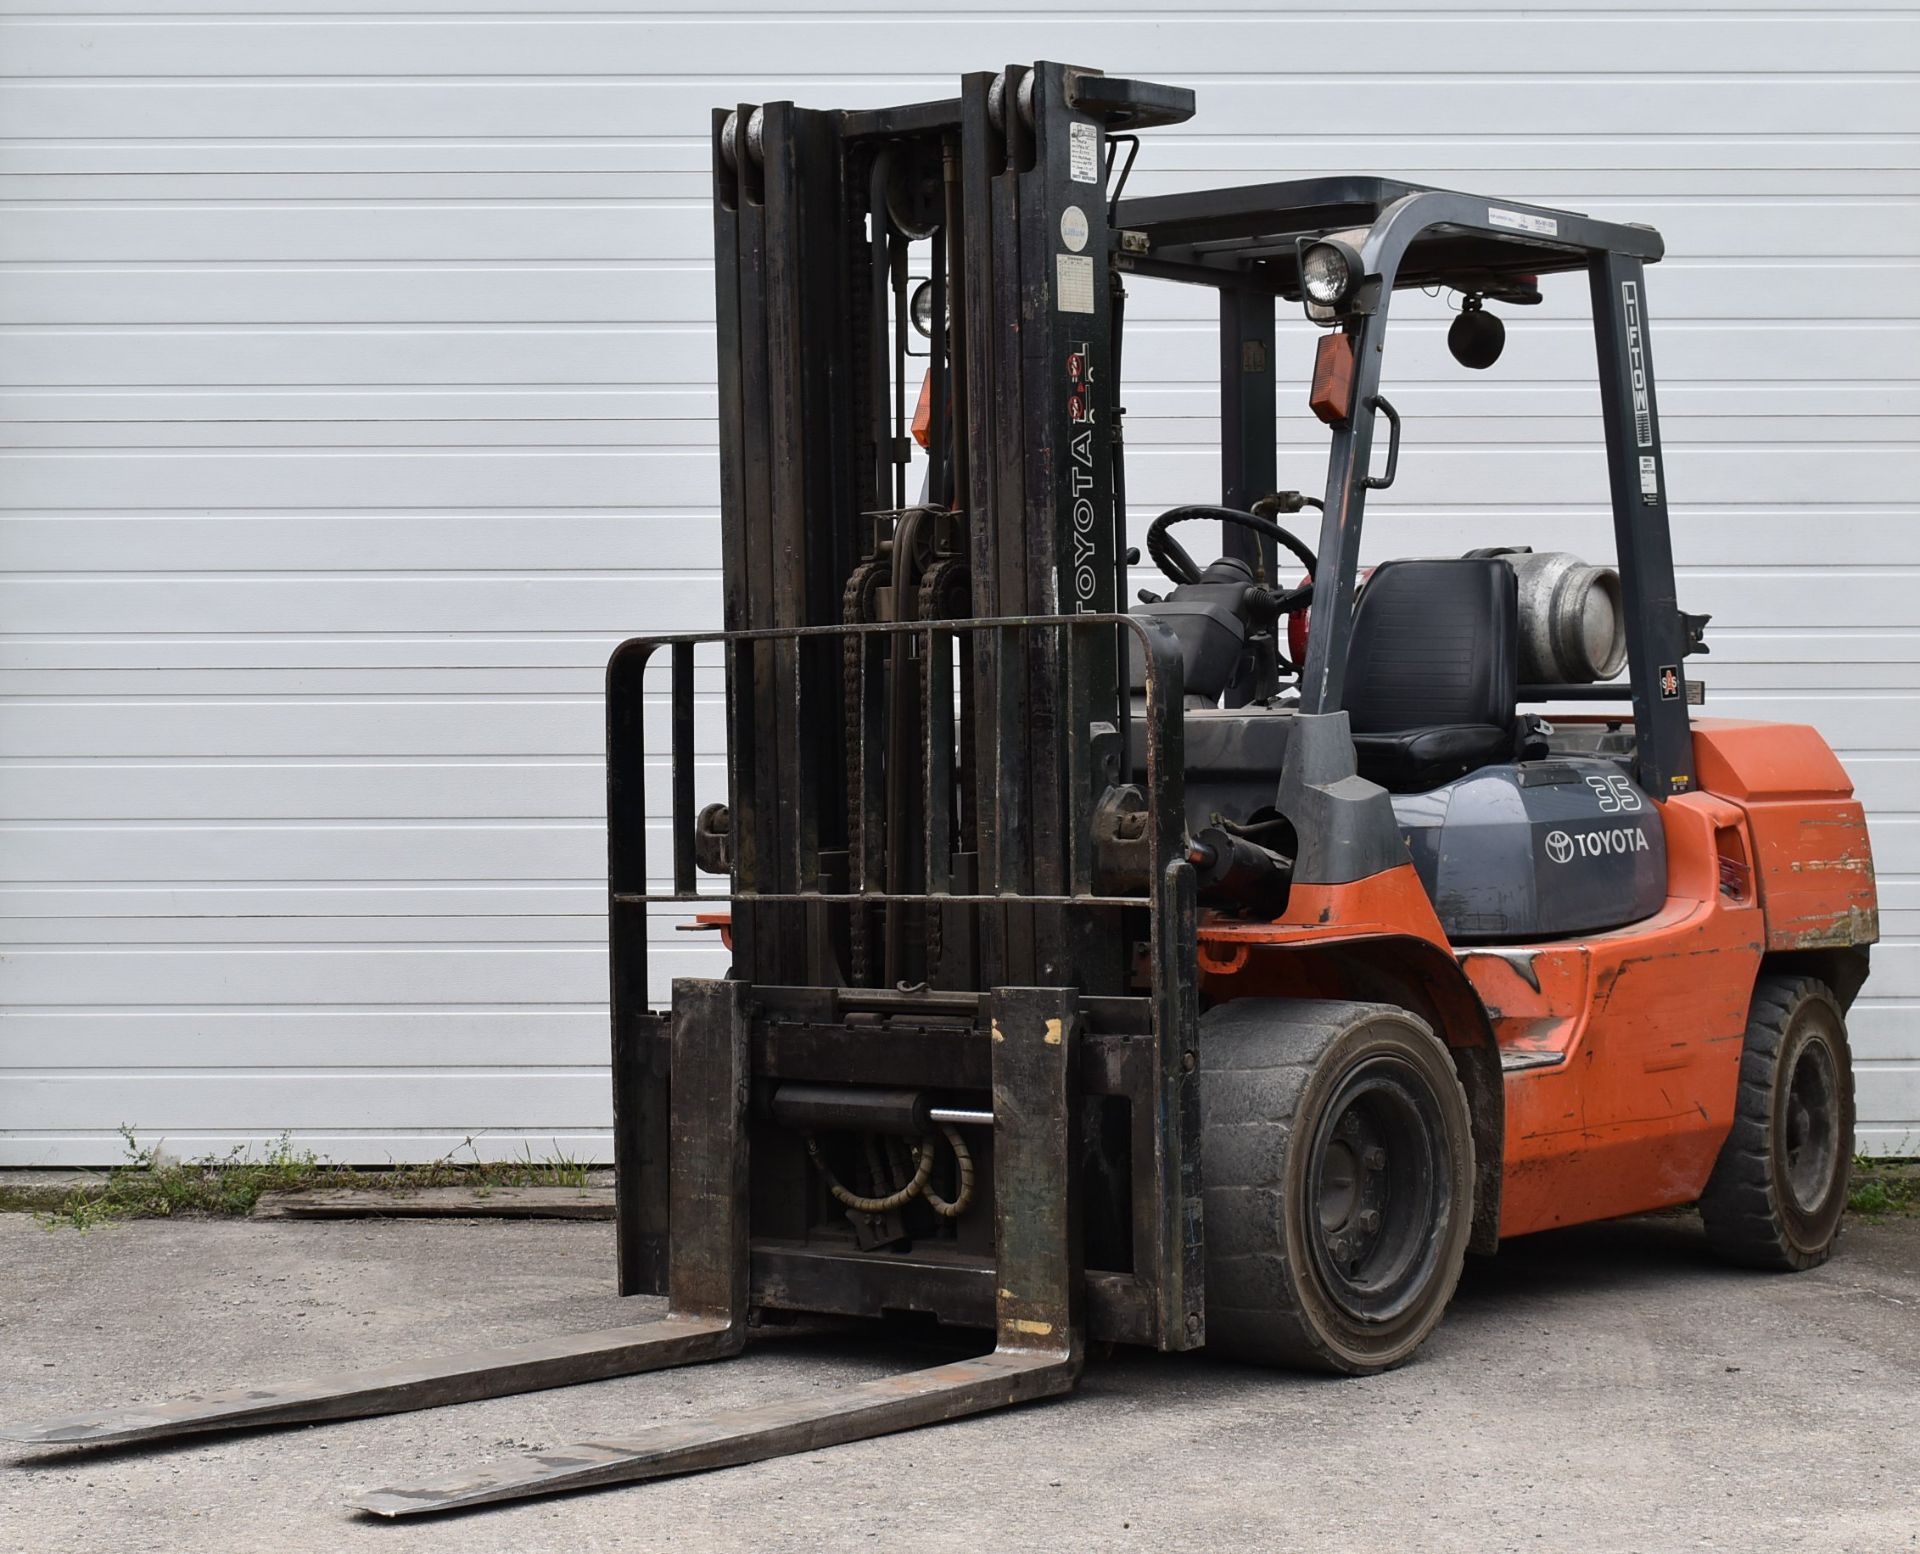 TOYOTA 35 7FGU35 7,000 LB CAPACITY LPG FORKLIFT WITH 187" MAXIMUM LIFT HEIGHT, 3-STAGE MAST, SIDE